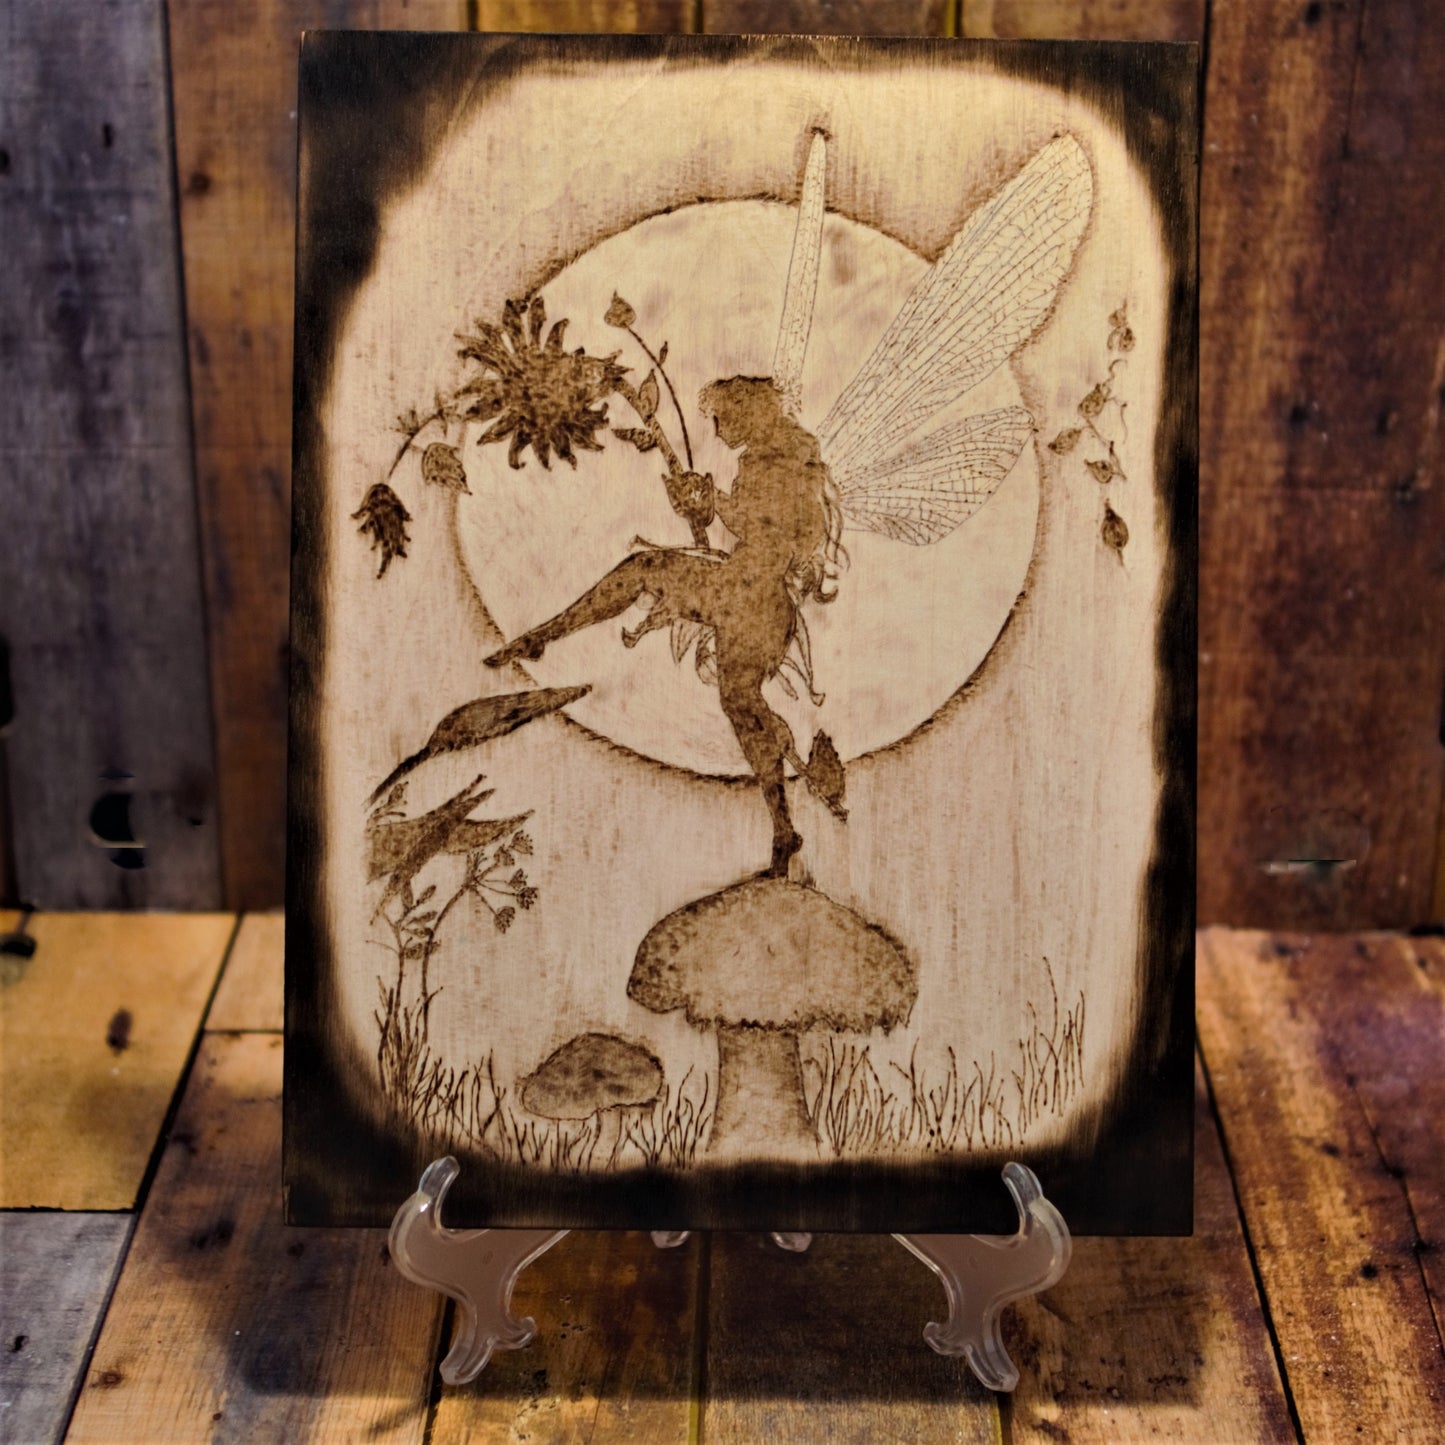 Pixie - Fairy - Nymph - Hand-Crafted Wood burning (Pyrography) on Birch or Basswood